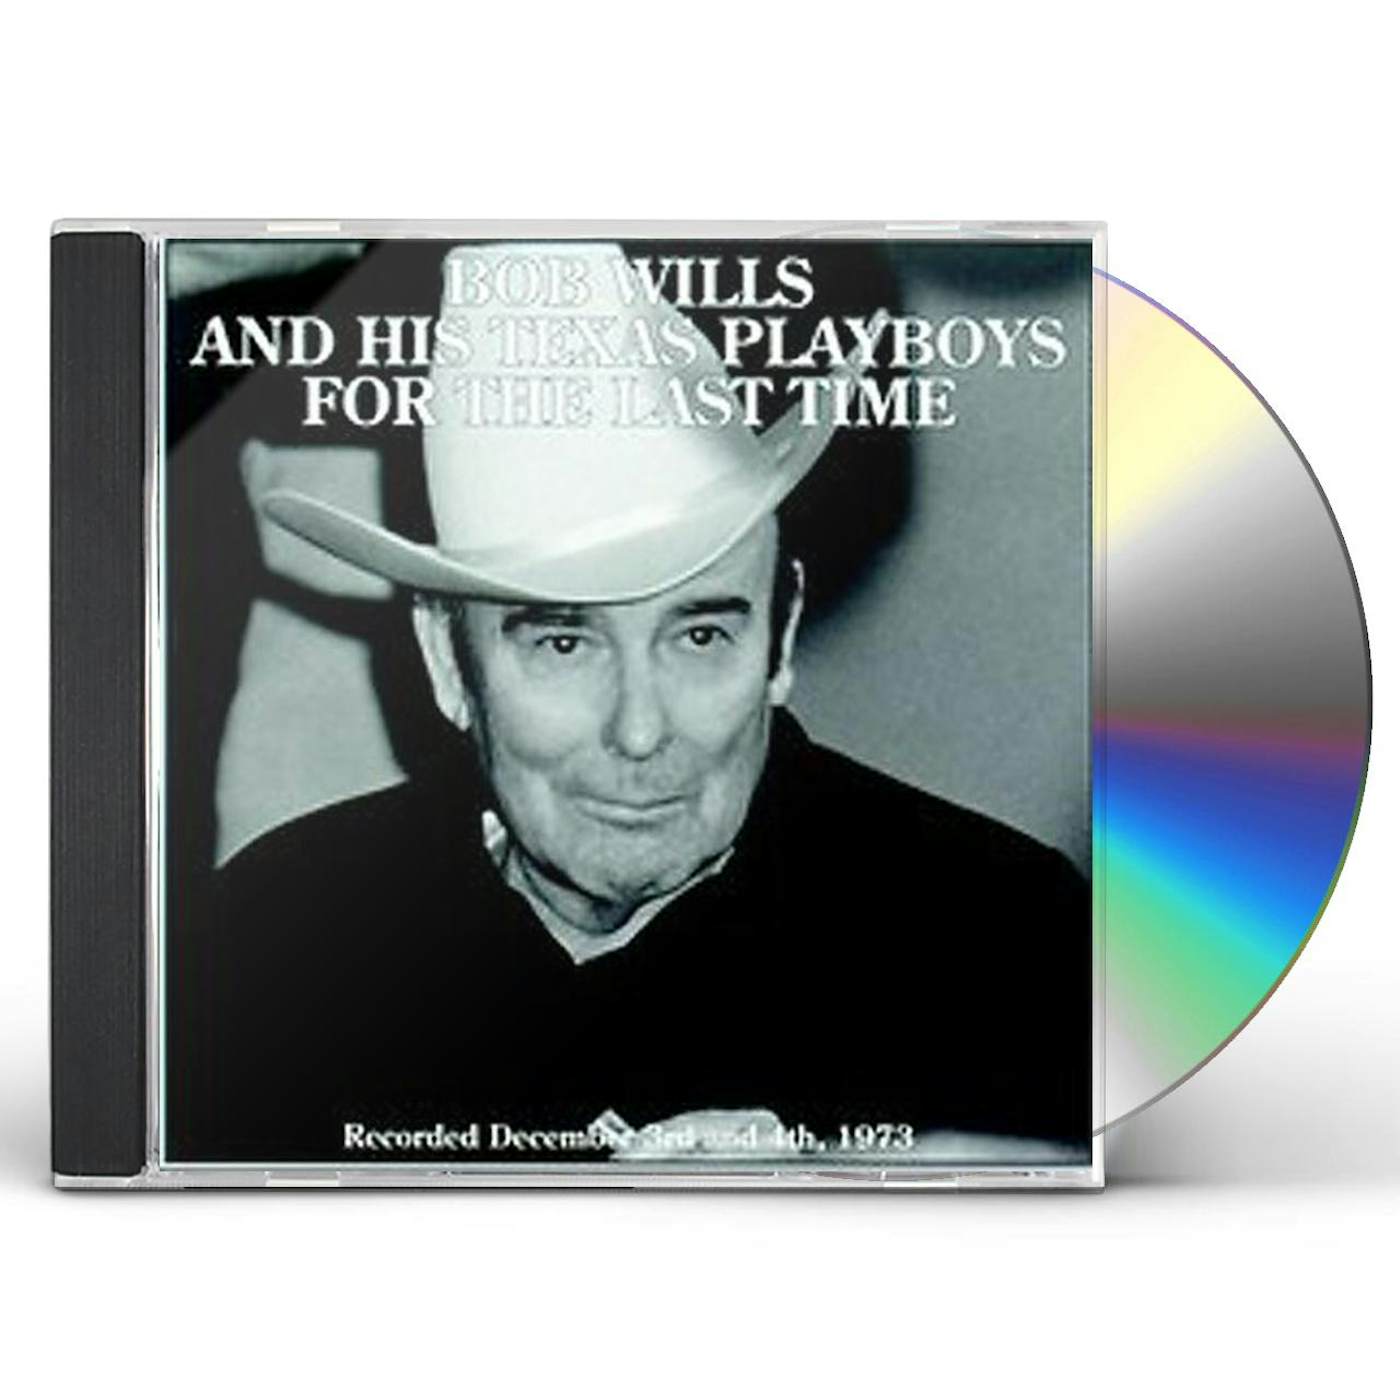 Bob Wills FOR THE LAST TIME CD